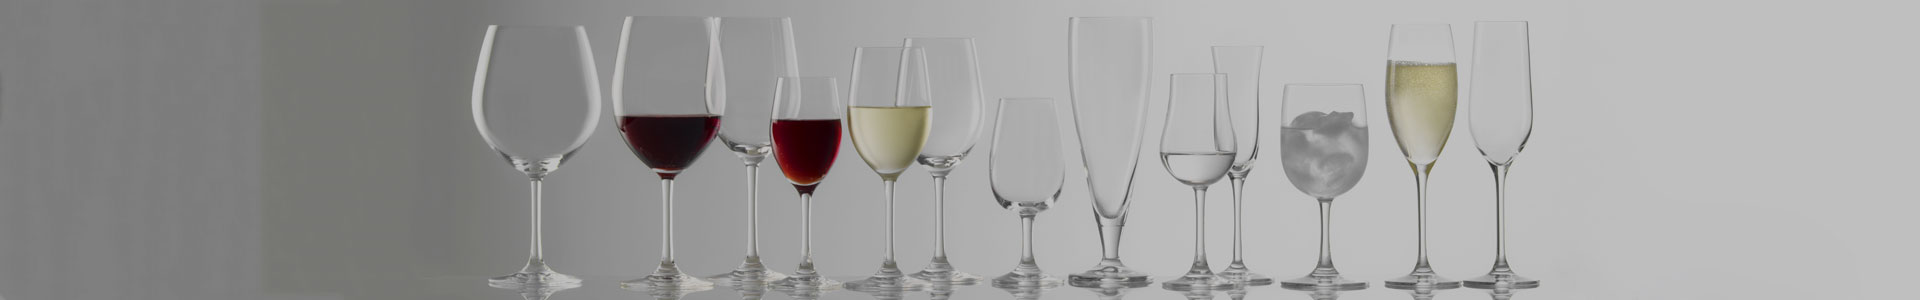 Wine glasses and stemware from the Classic Long-Life series by Stoelzle Lausitz.